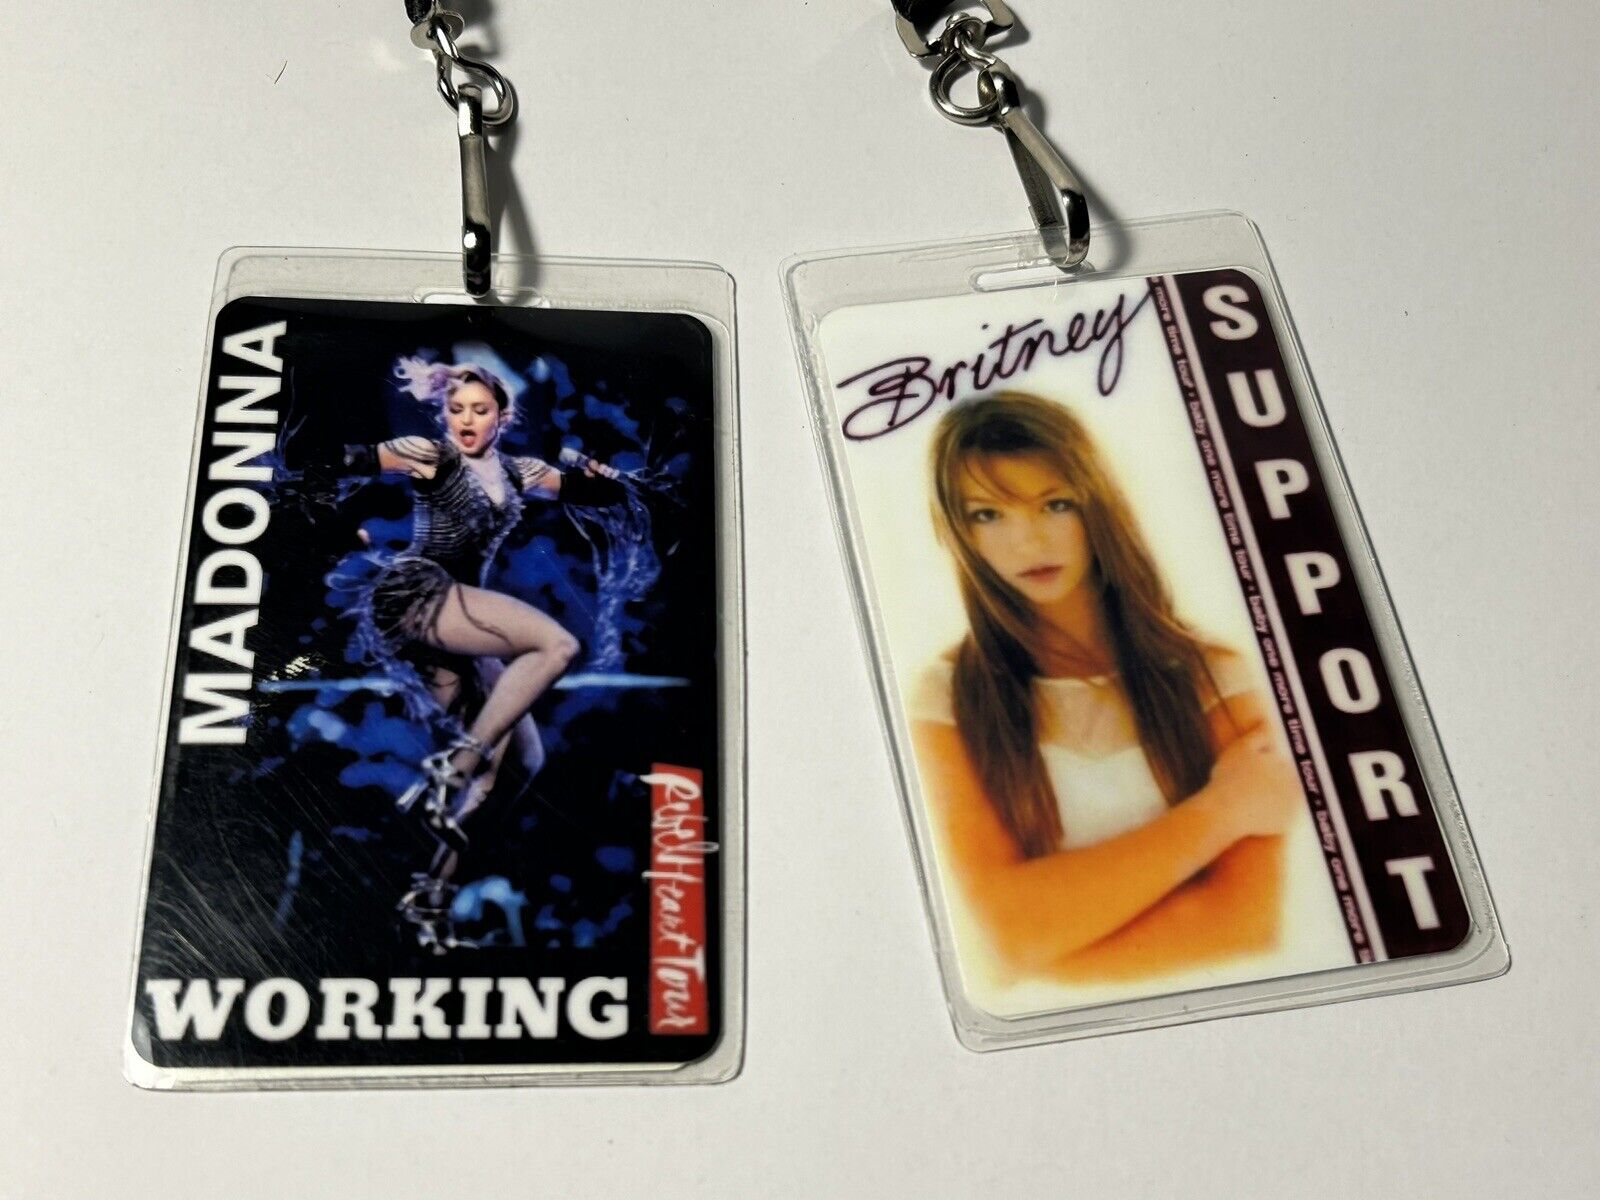 Madonna And Britney Spears Laminate Reprint Tour Passes